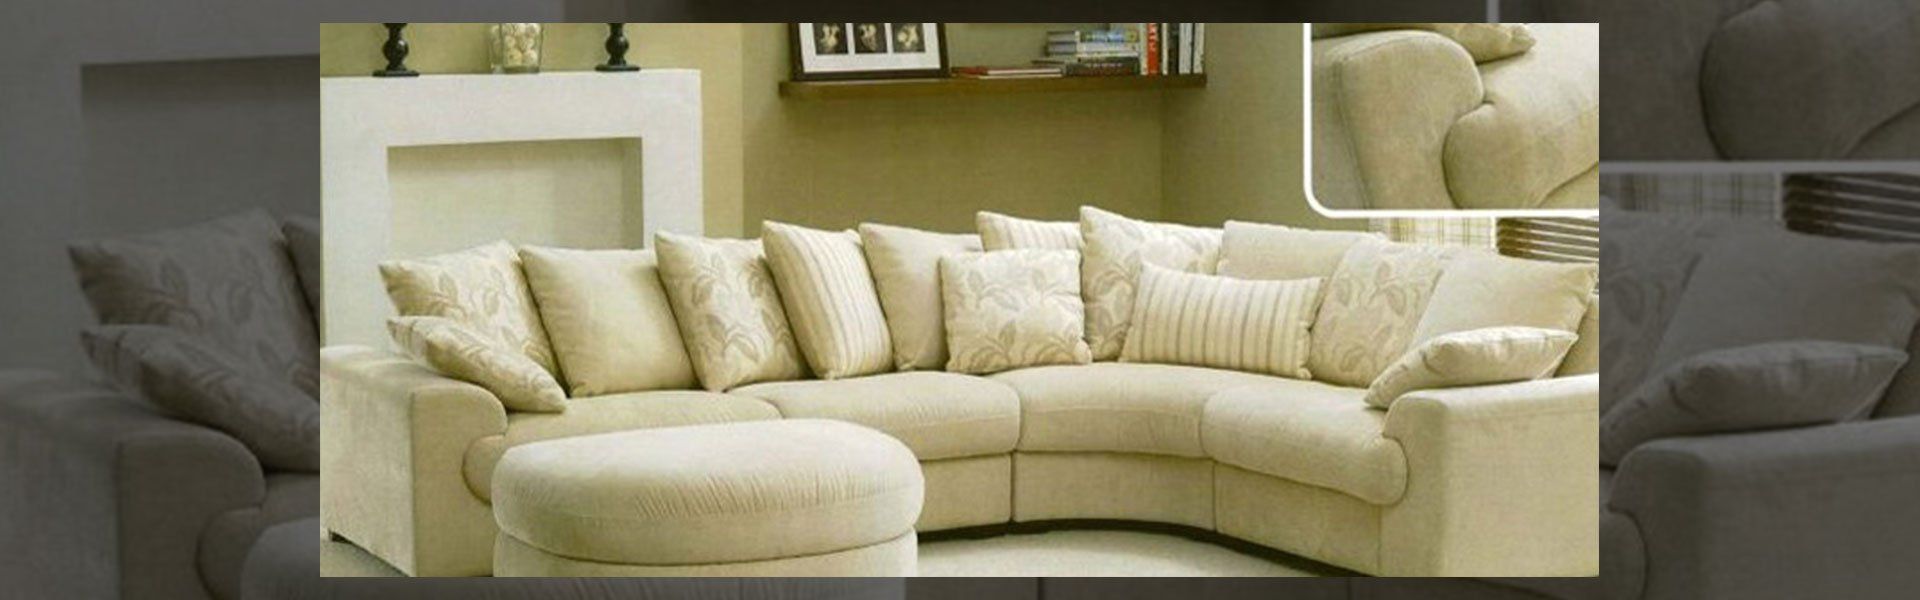 We offer high-quality upholstery services in Troon